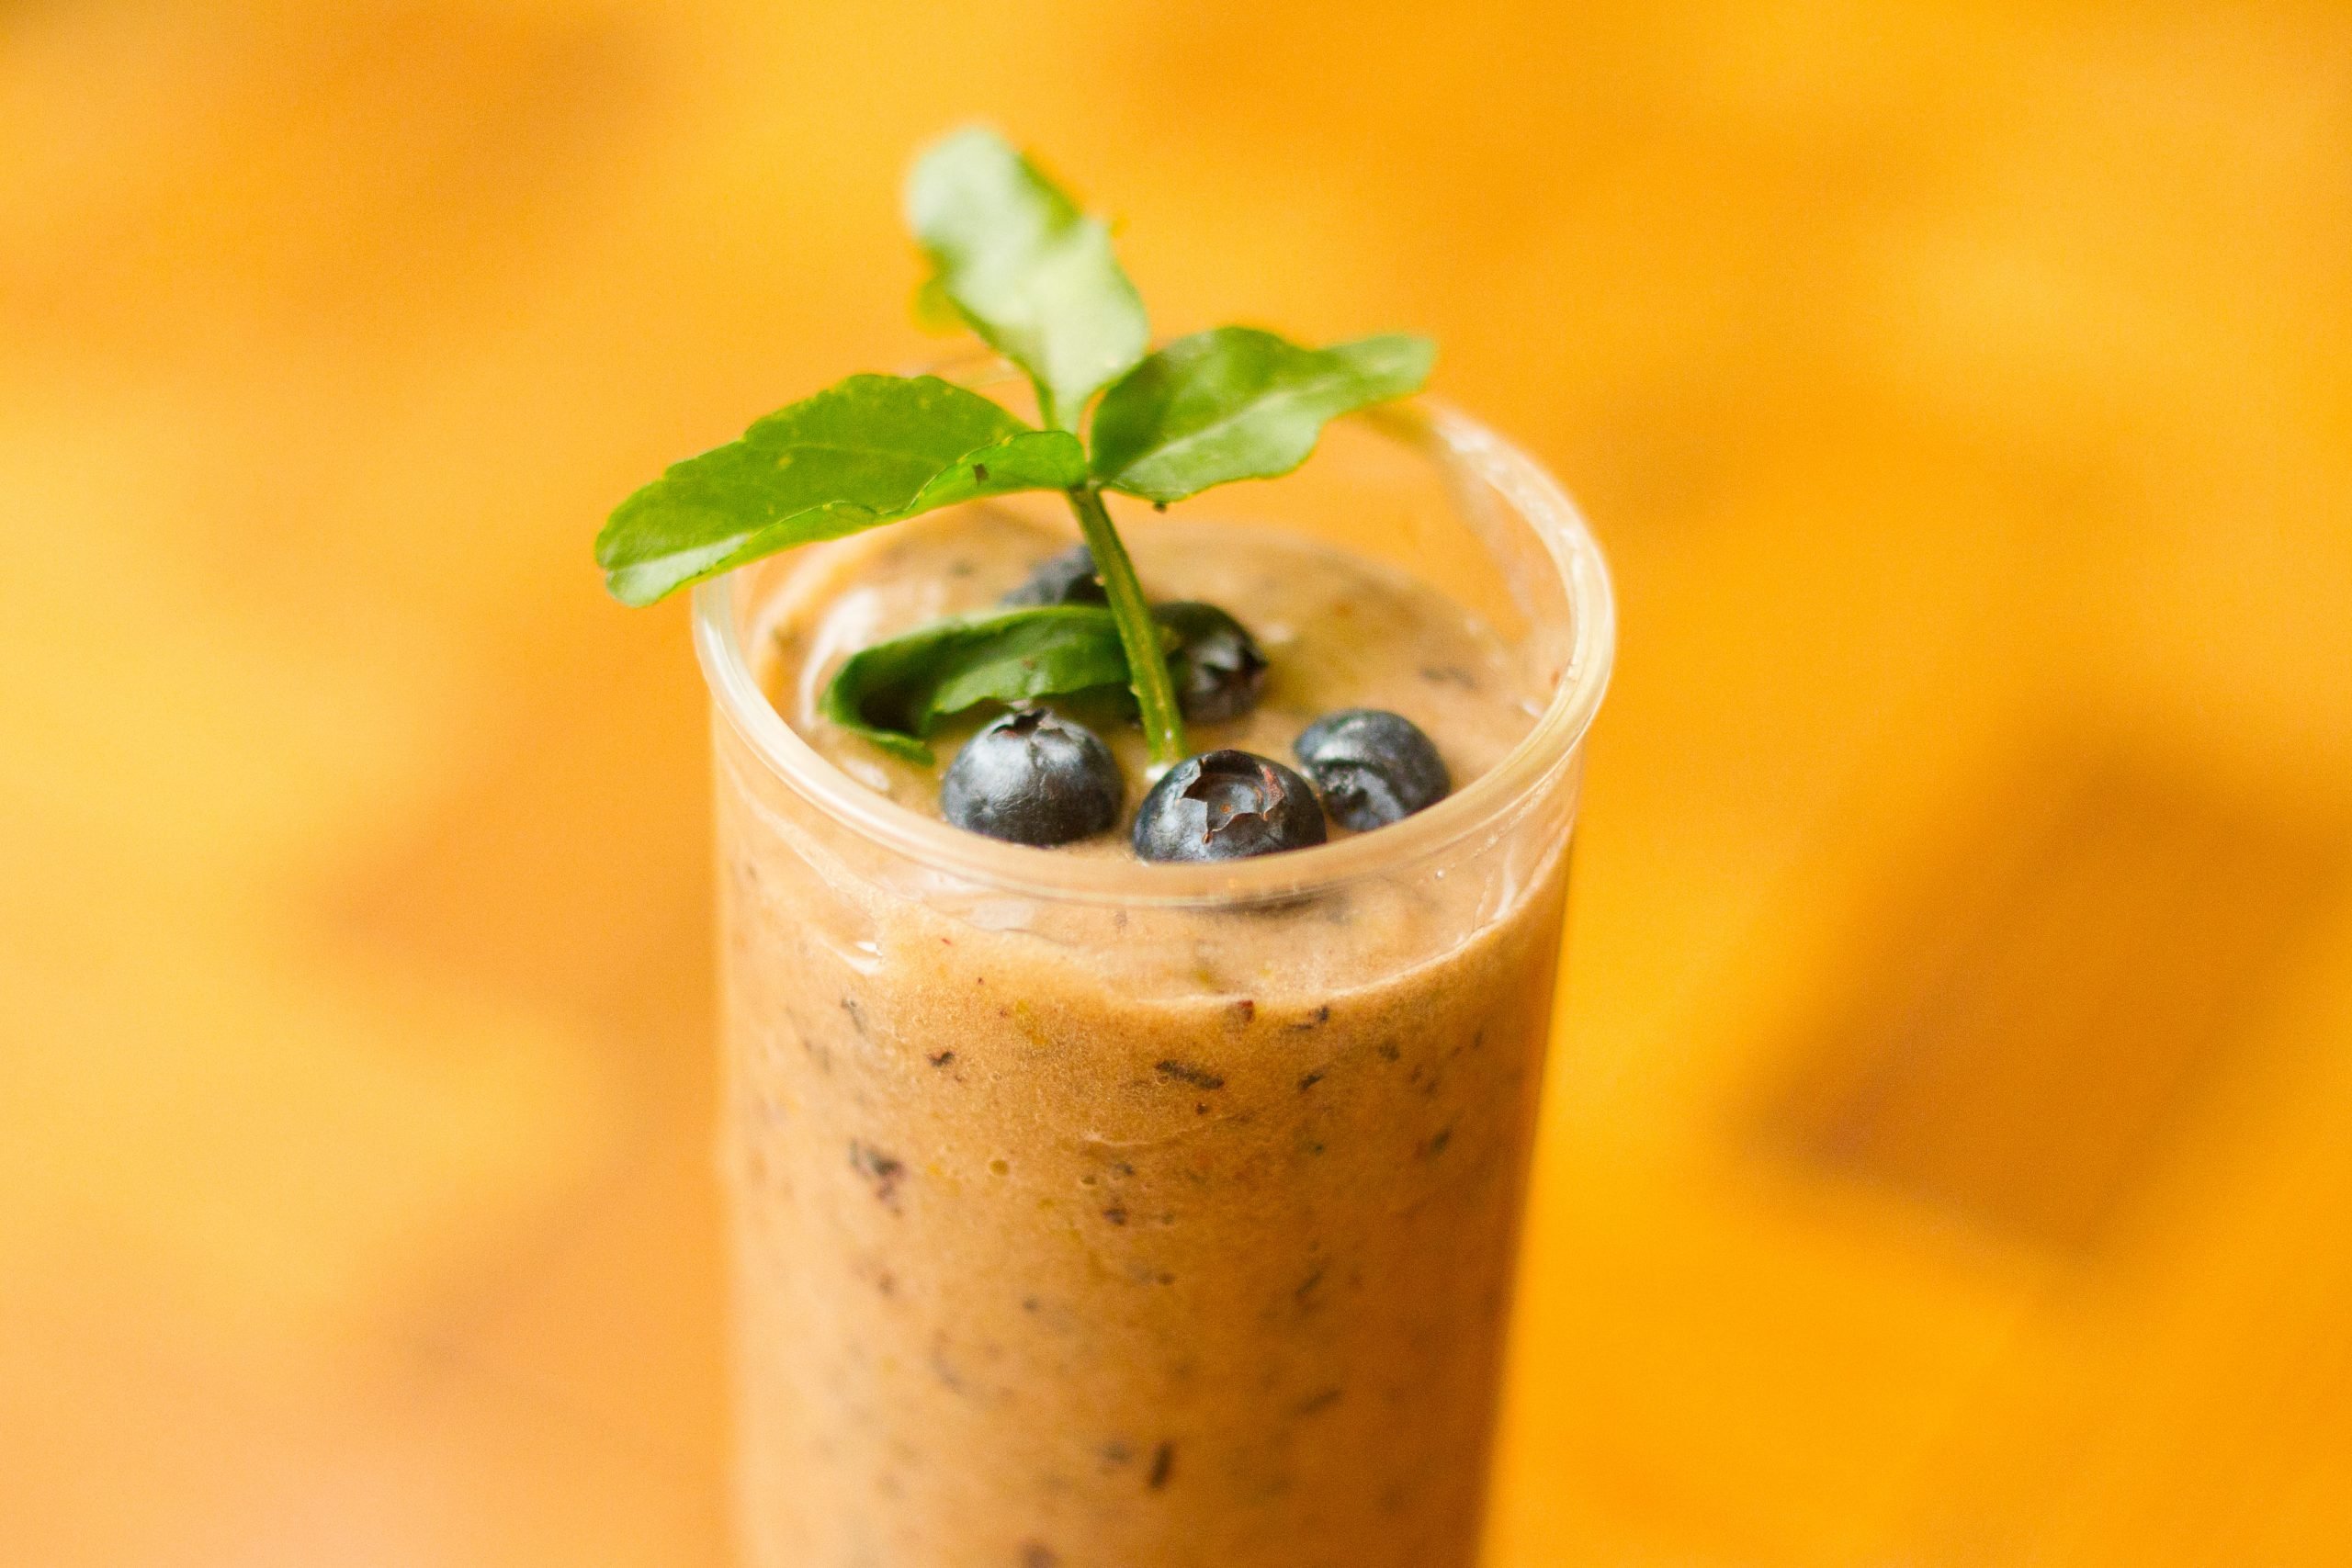 How to Make a Non Dairy Banana Blueberry Smoothie: 9 Steps